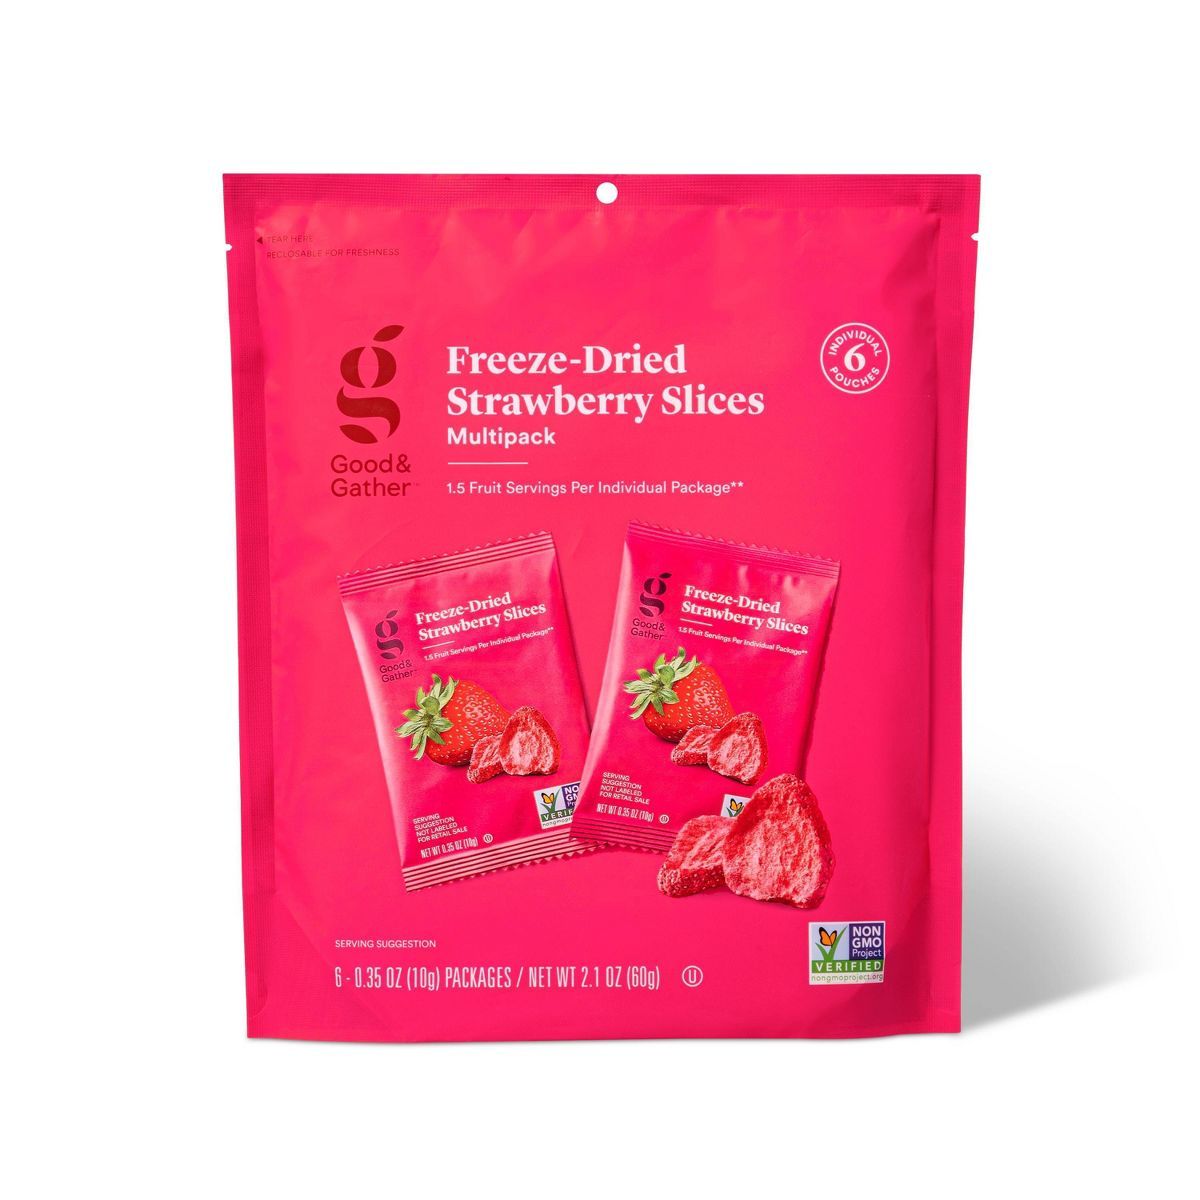 Freeze Dried Strawberry Slices Multipack - 6ct/2.1oz - Good & Gather™ | Target